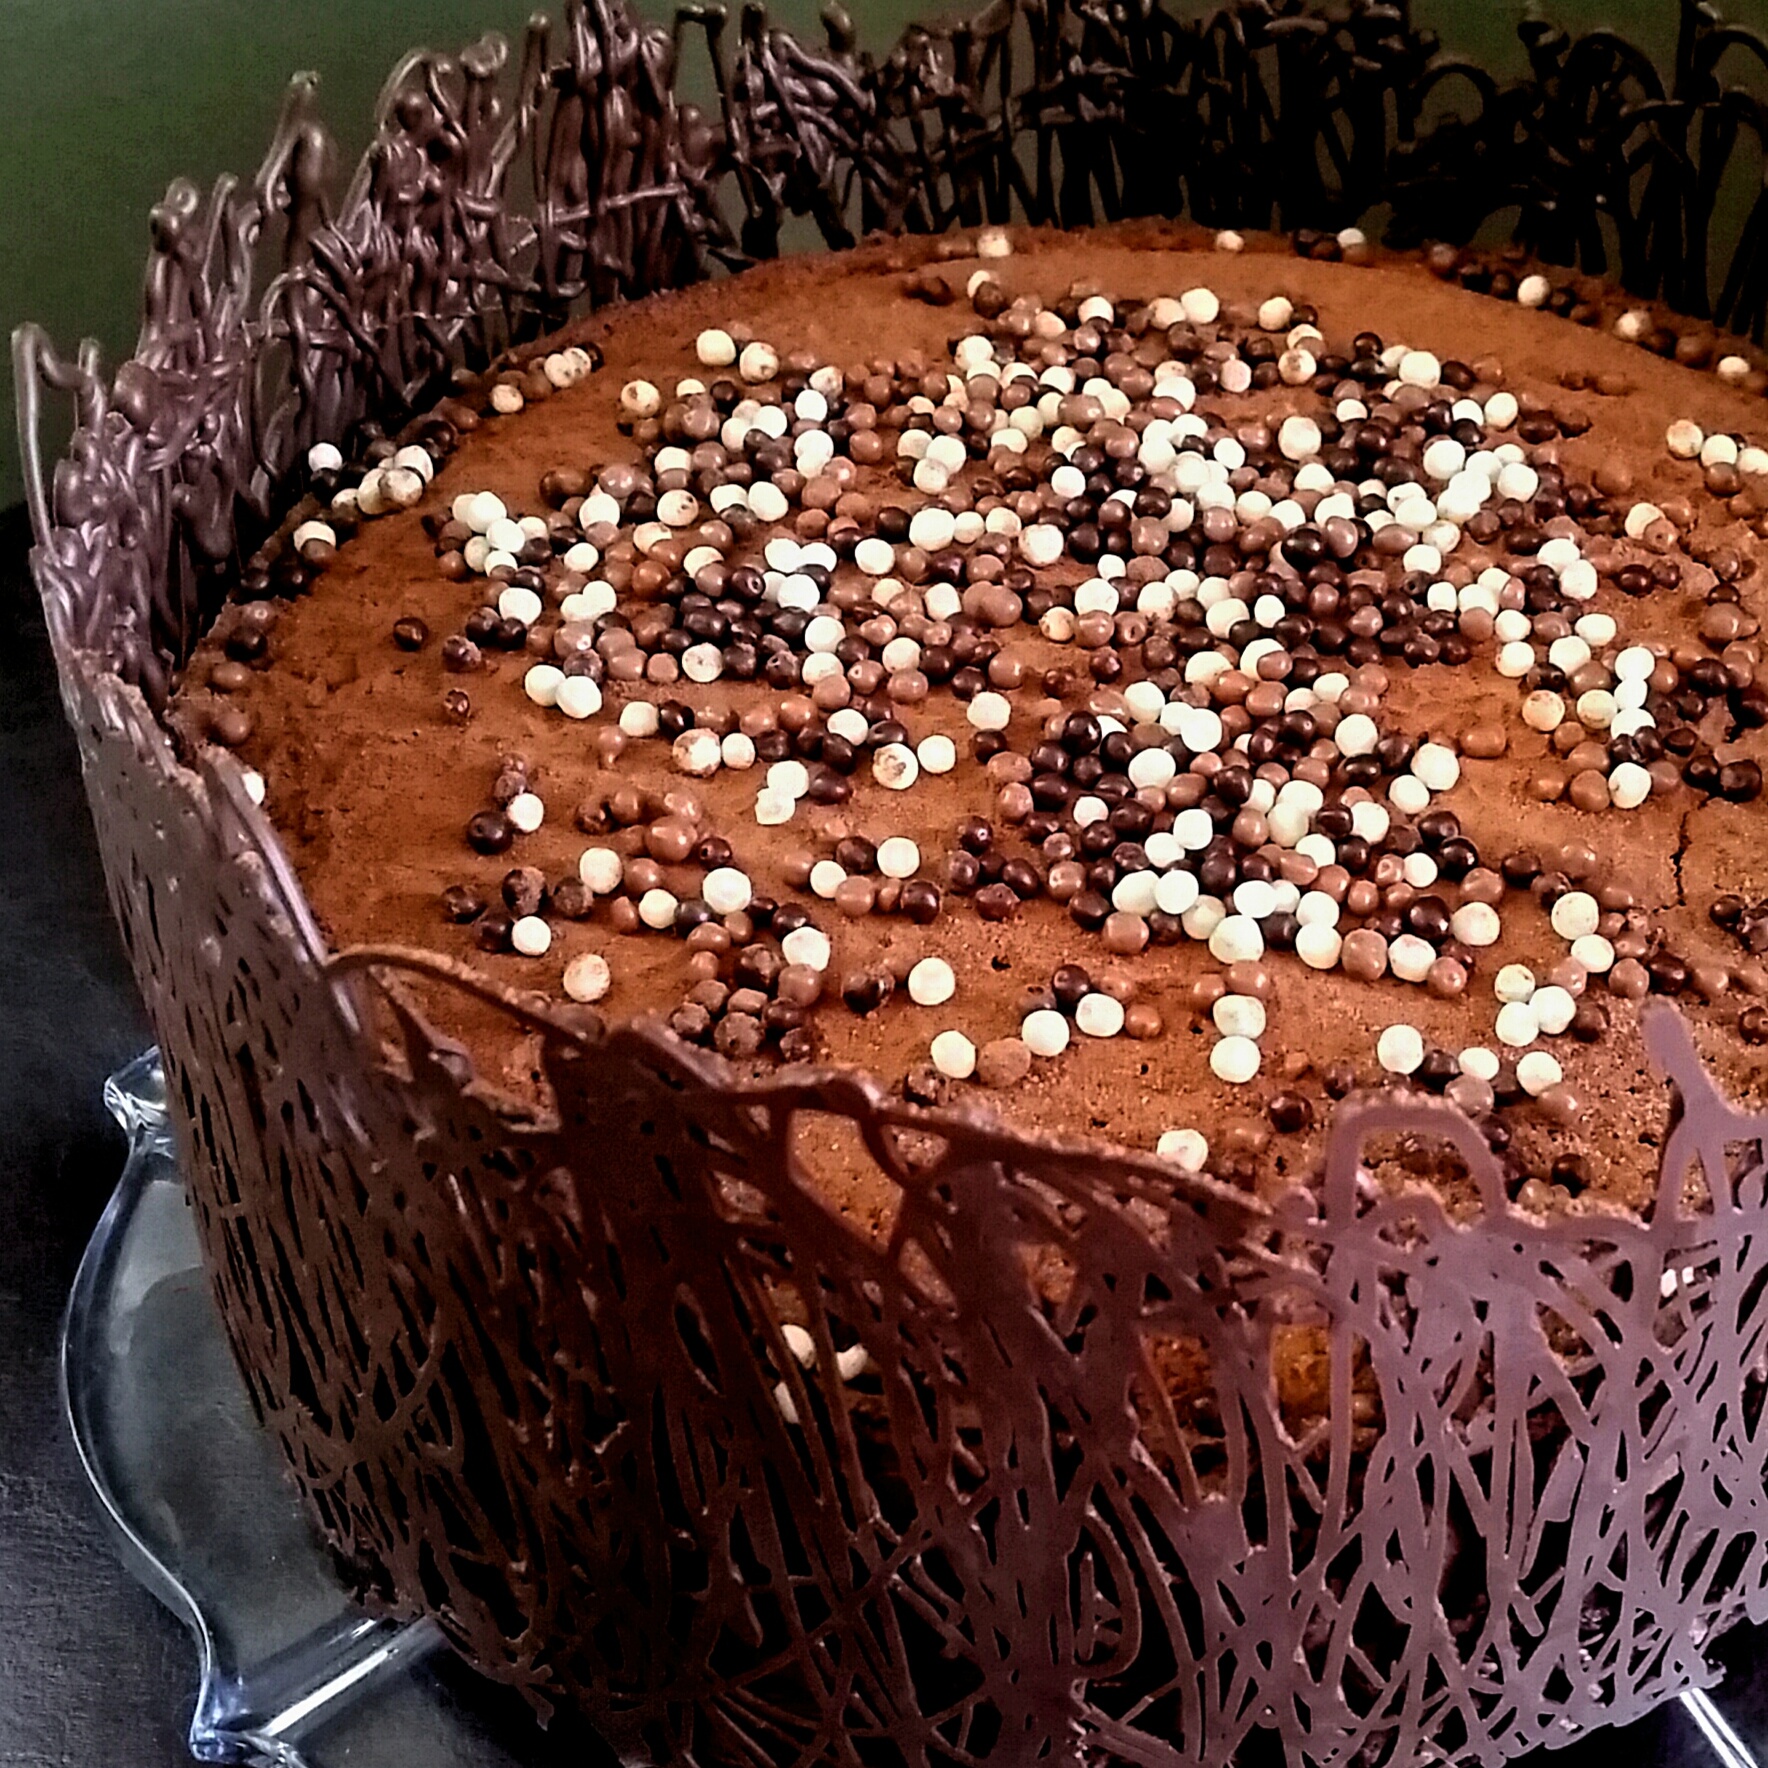 Chocolate Buttermilk Layer Cake (inspired by Donna Hay)